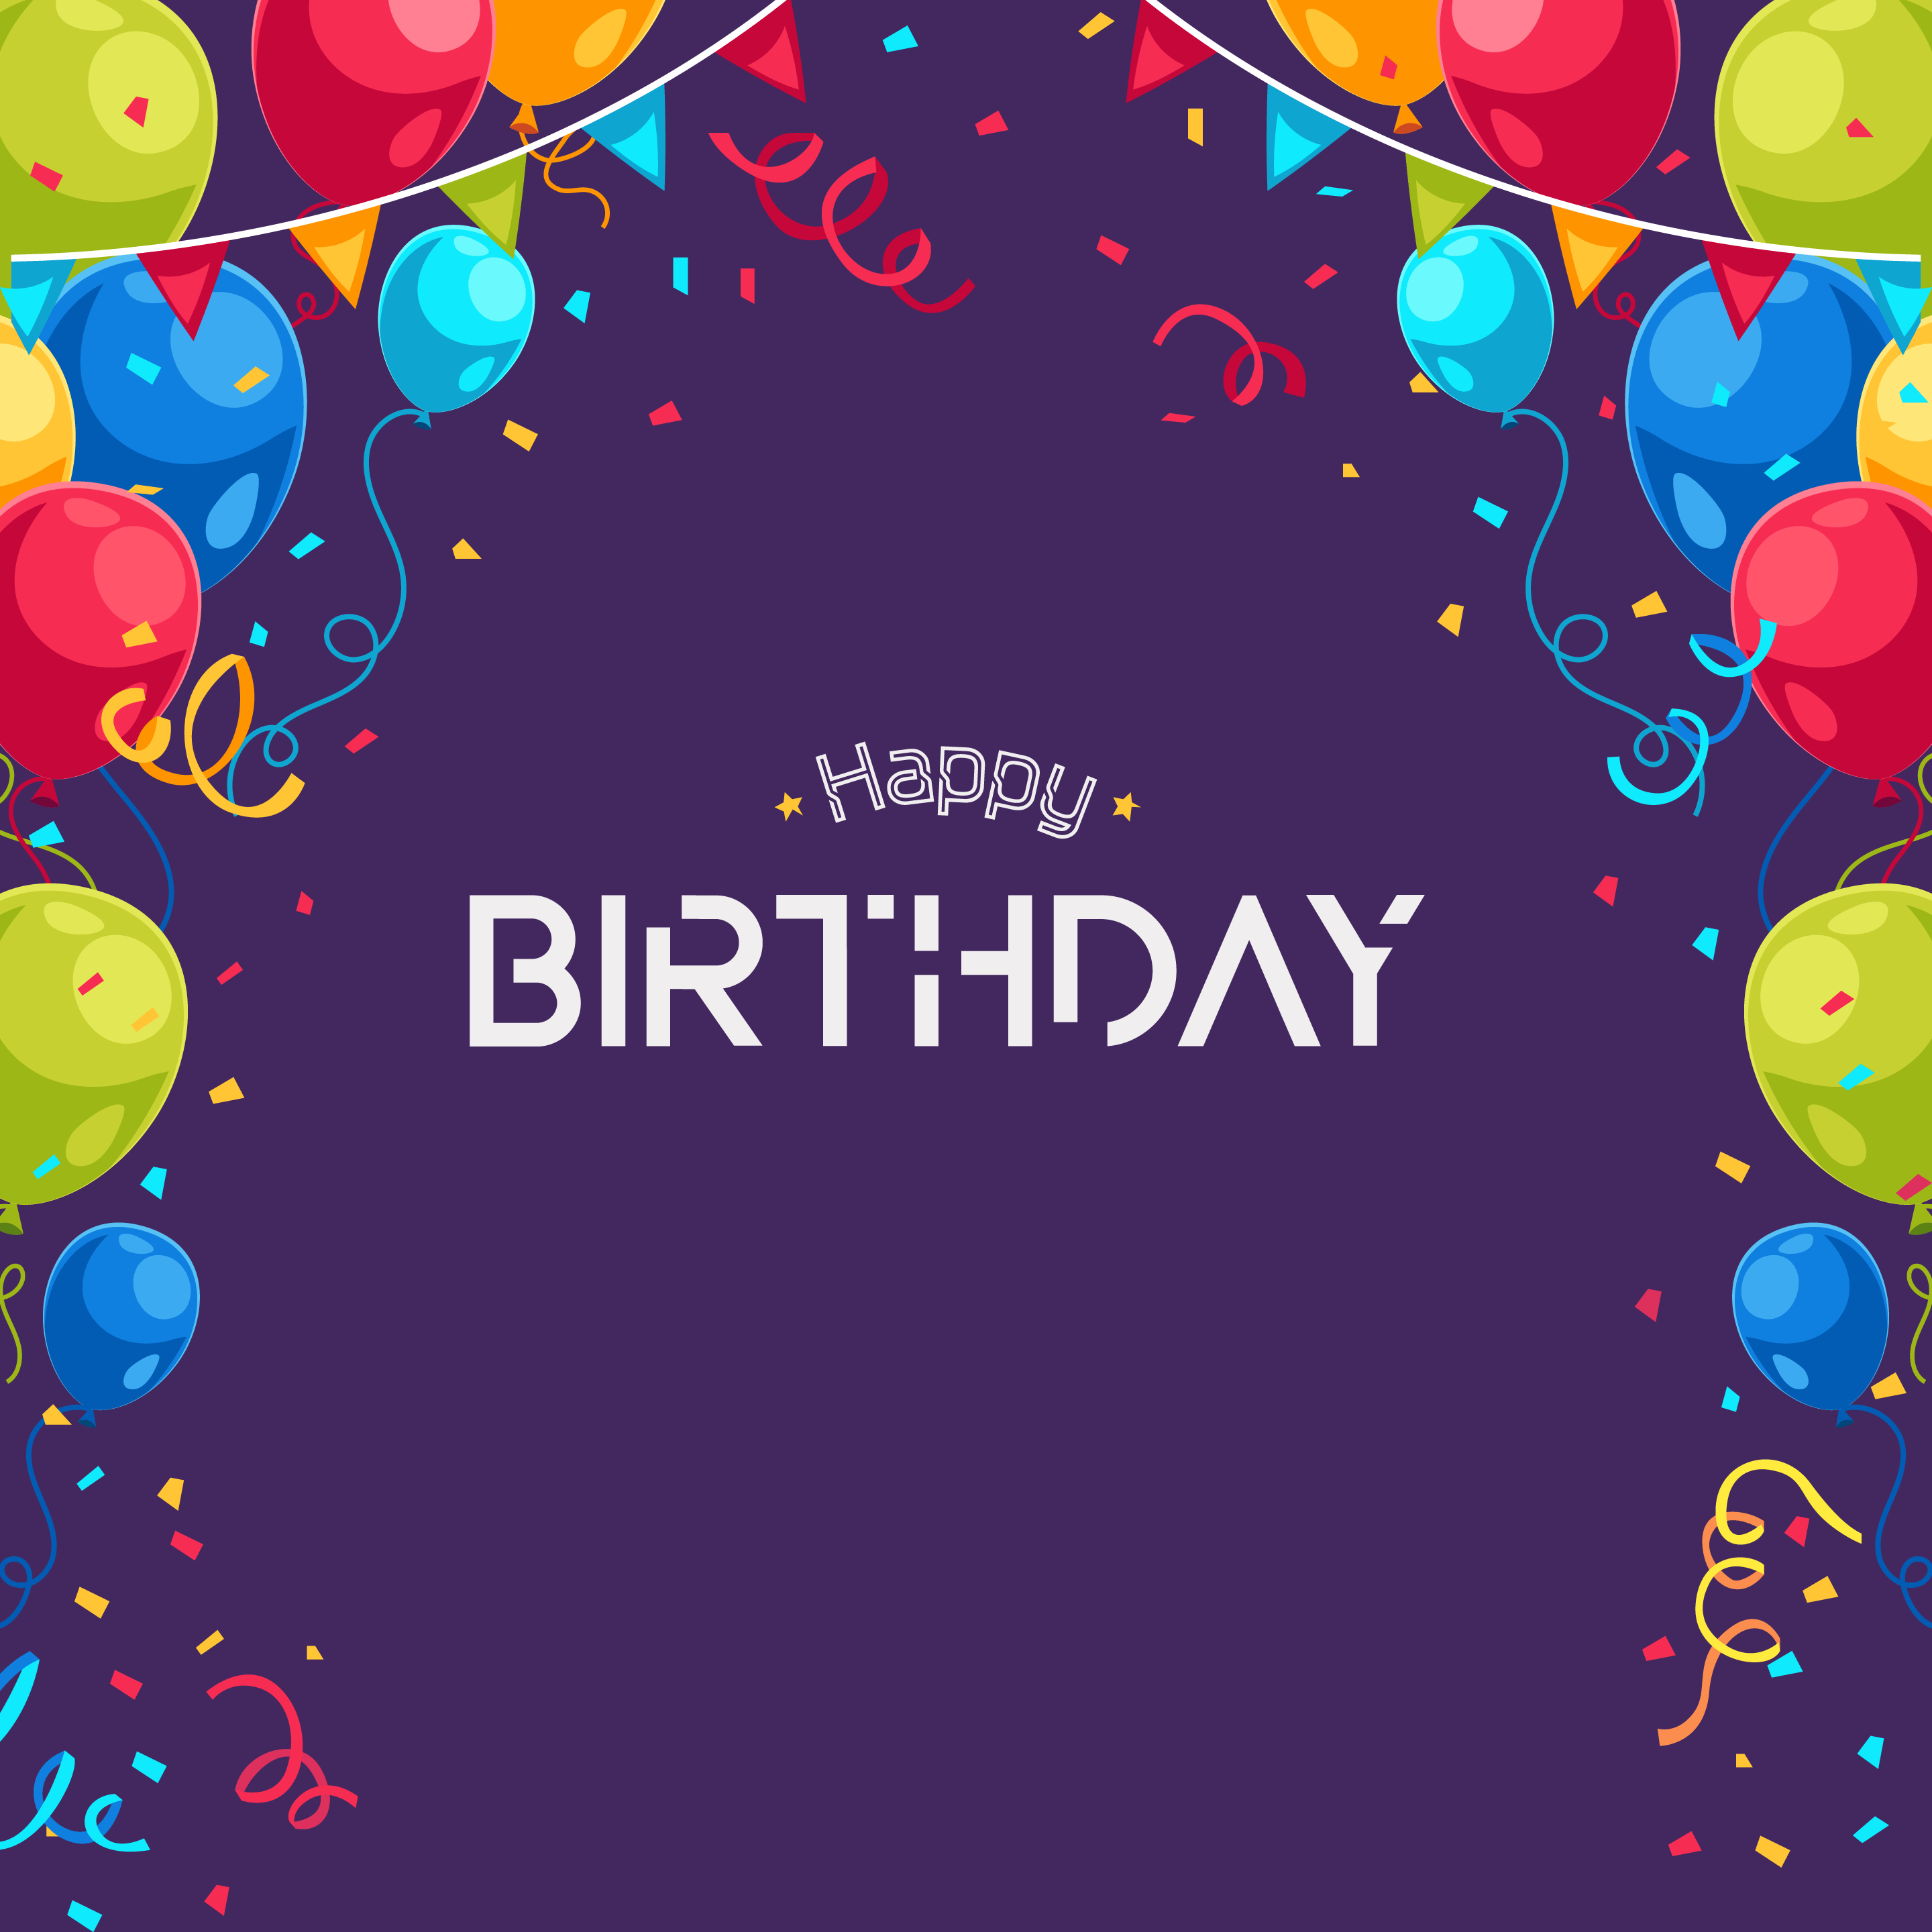 zoom birthday background images free